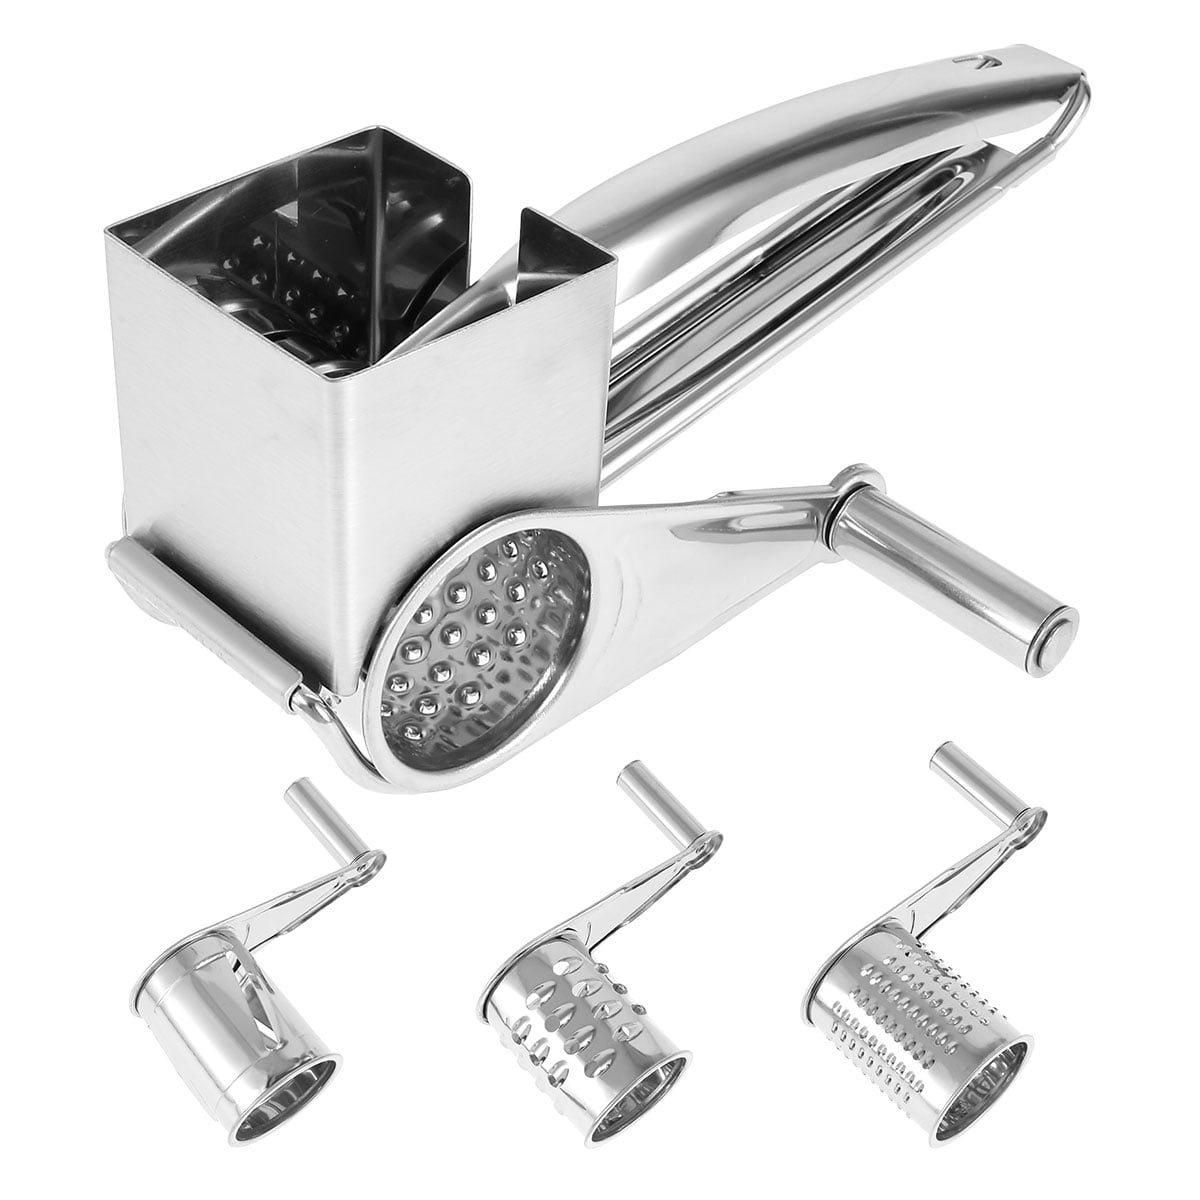 Tohuu Cheese Grater with Handle Handheld Stainless Steel Cheese